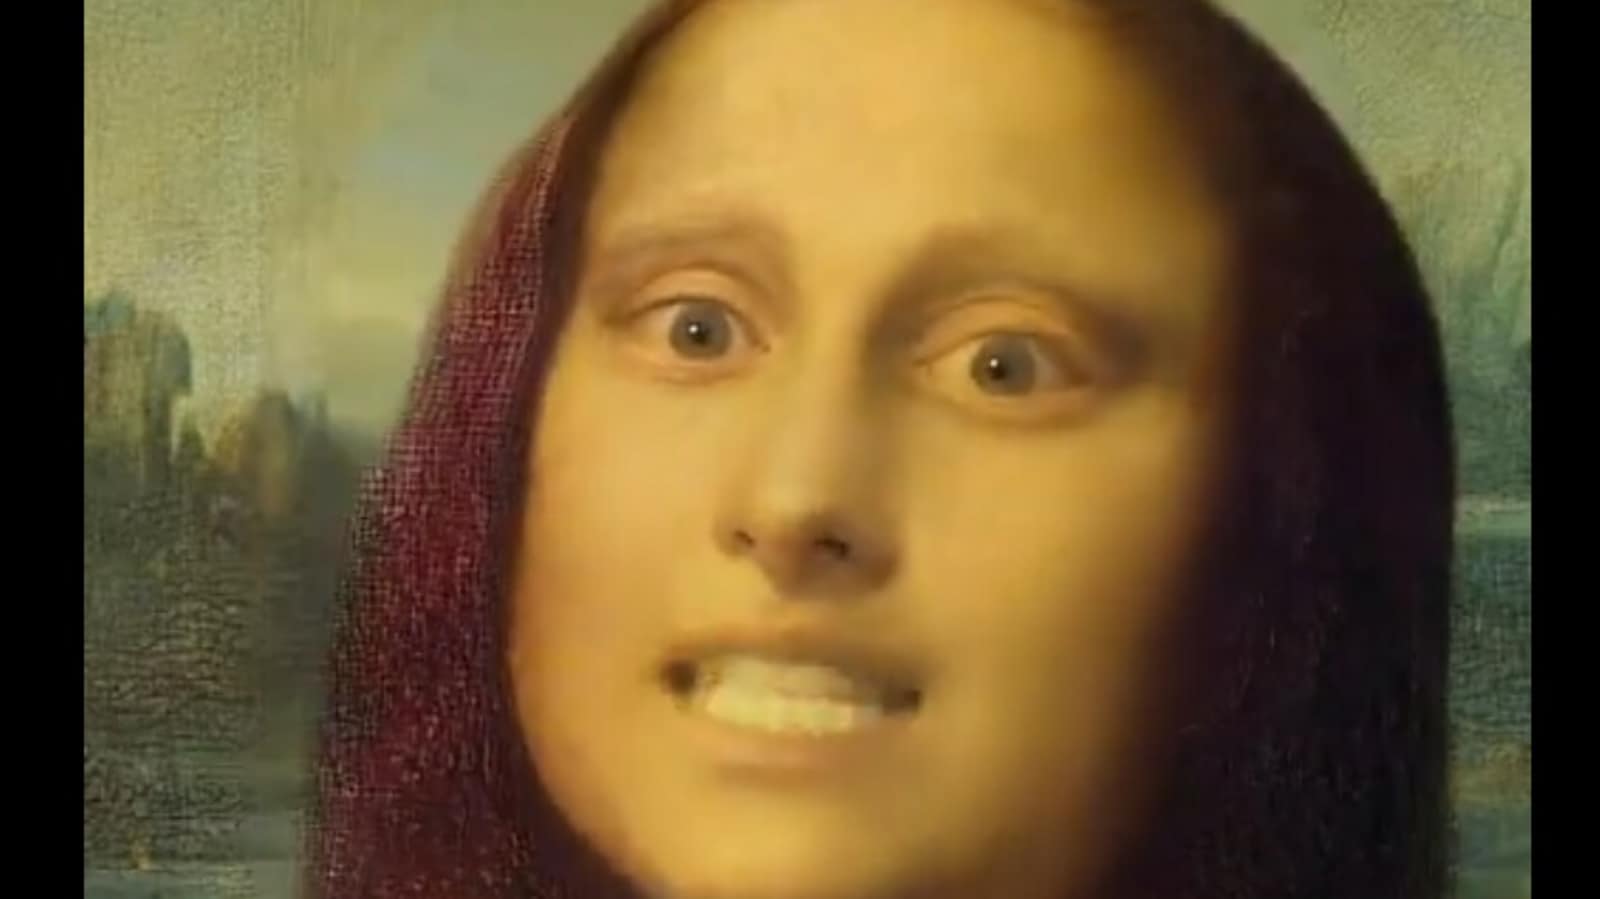 Mona Lisa rapping: Microsoft’s new AI app makes iconic painting sing, viral video surprises people